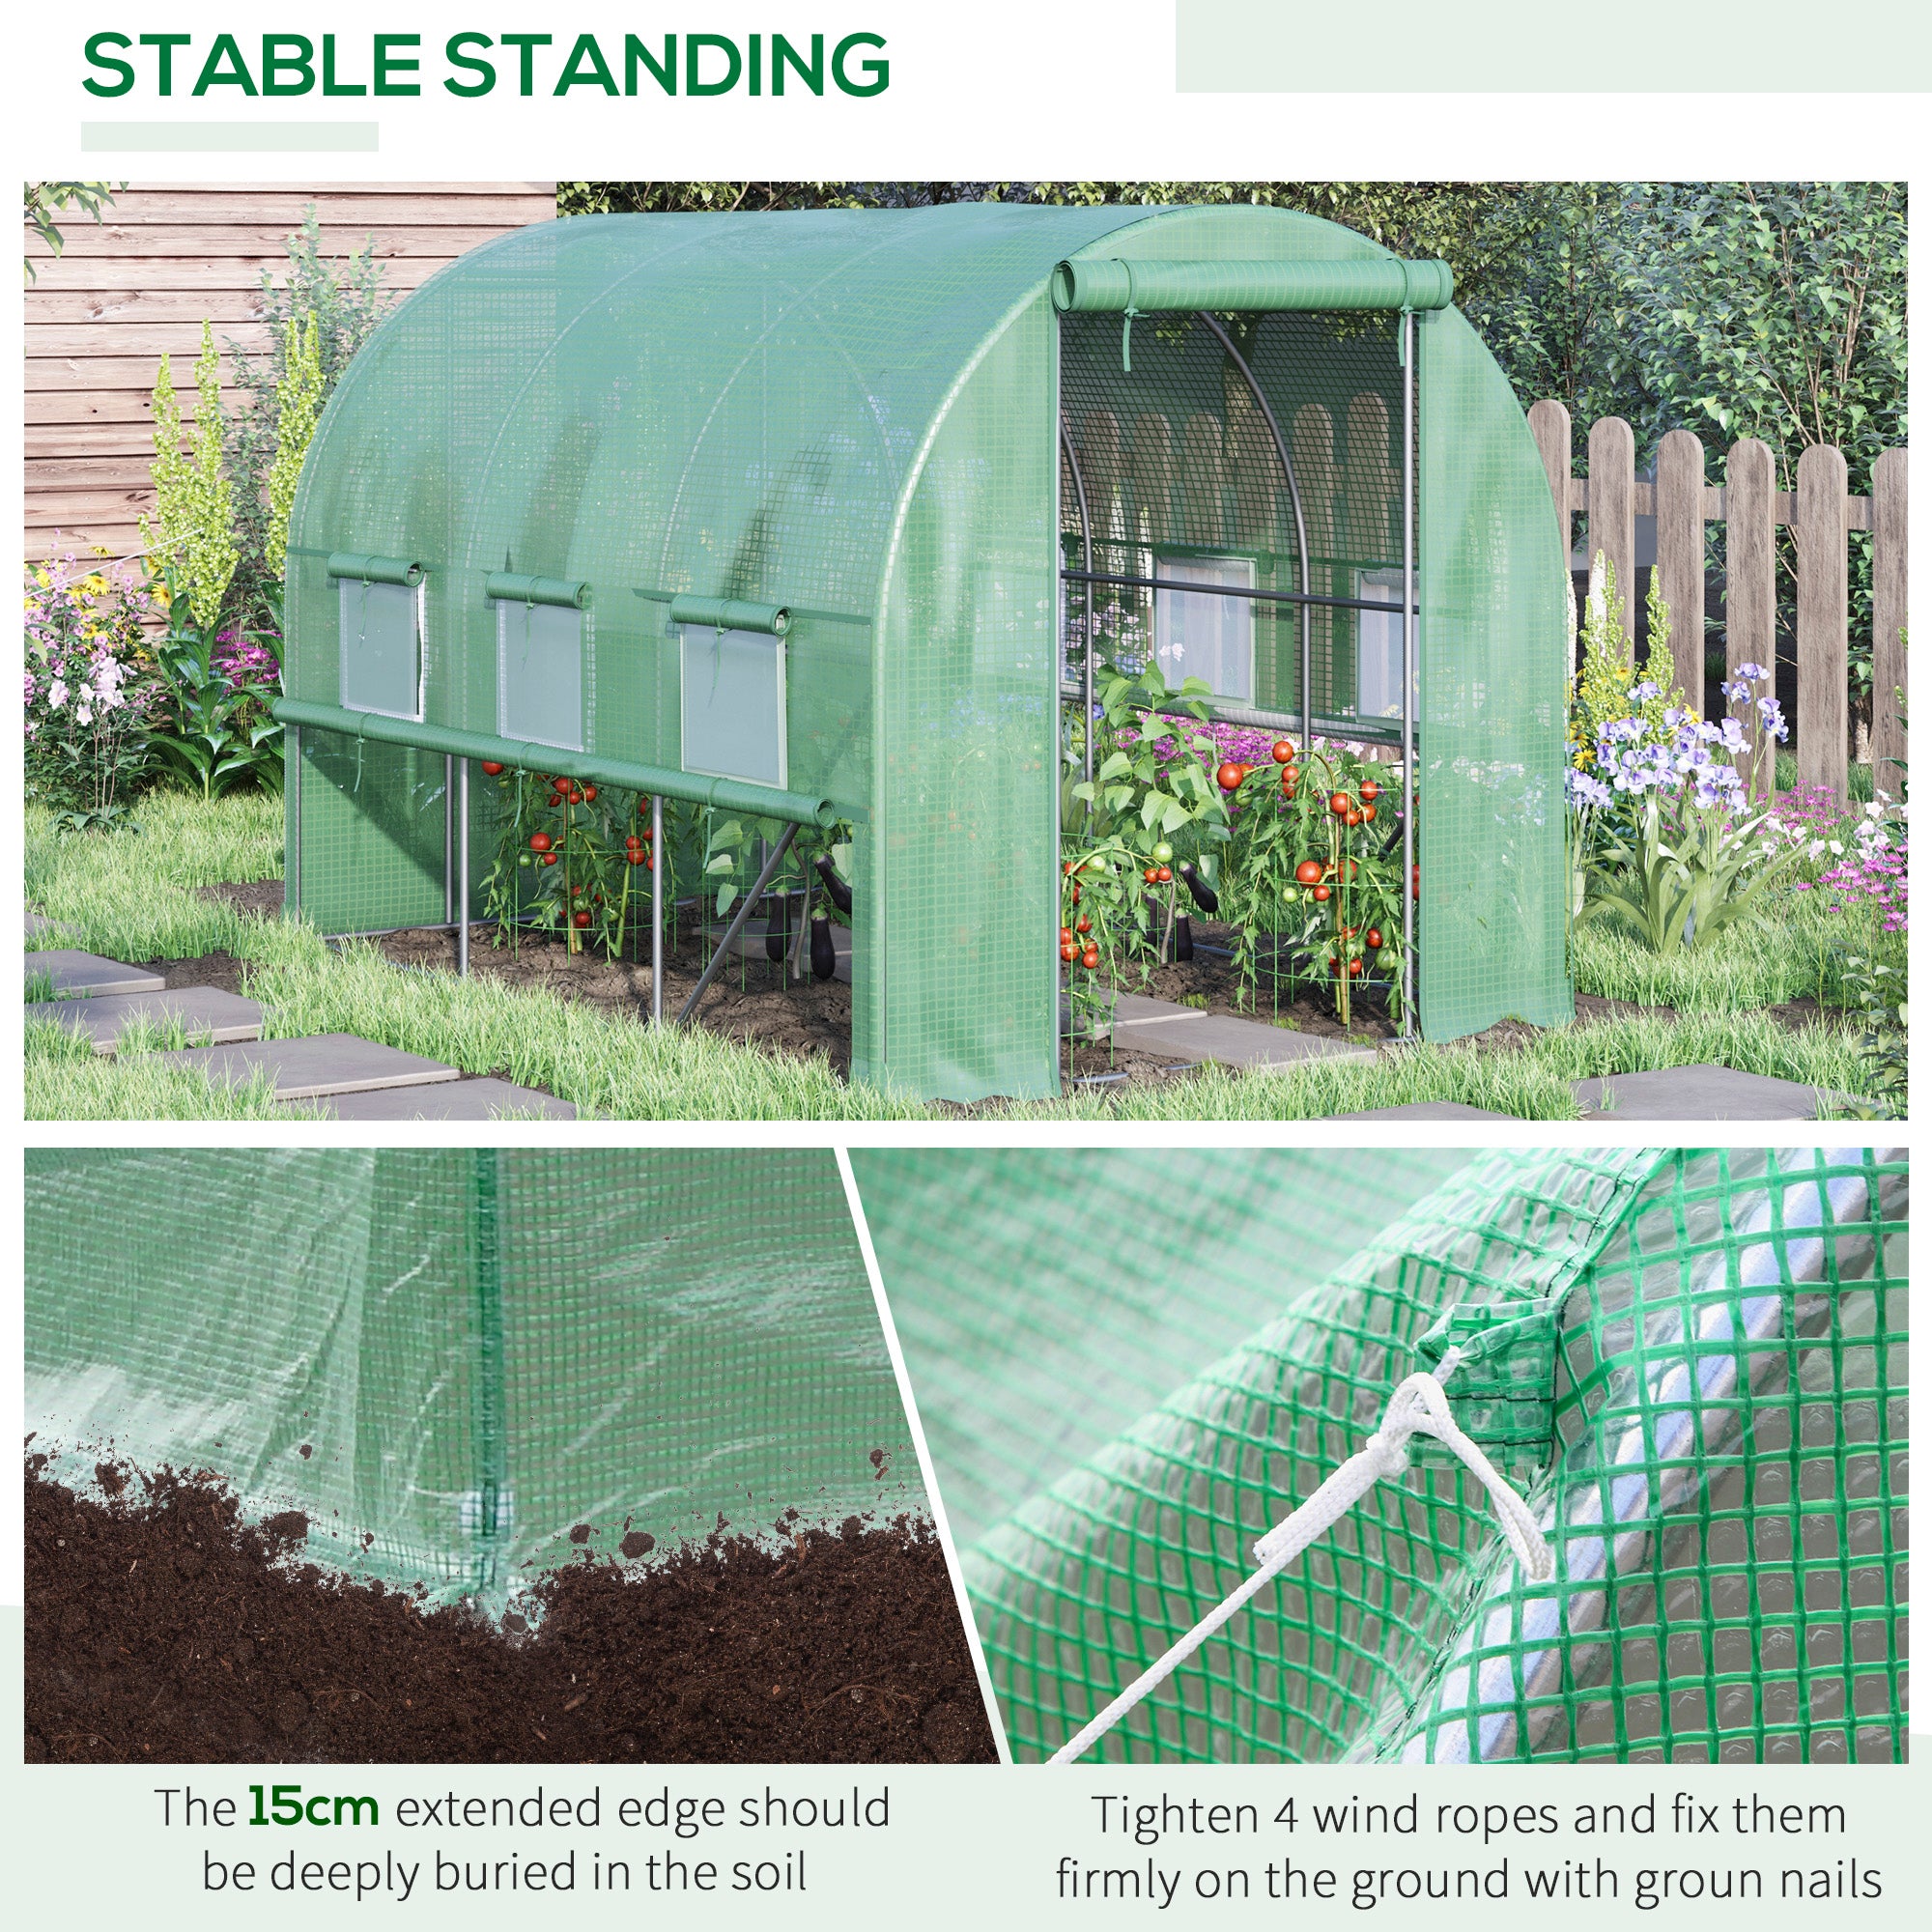 Outsunny Walk In Greenhouse, Garden Polytunnel with PE Cover, Zipped Roll Up Door and 6 Mesh Windows, 3x2x2m, Green